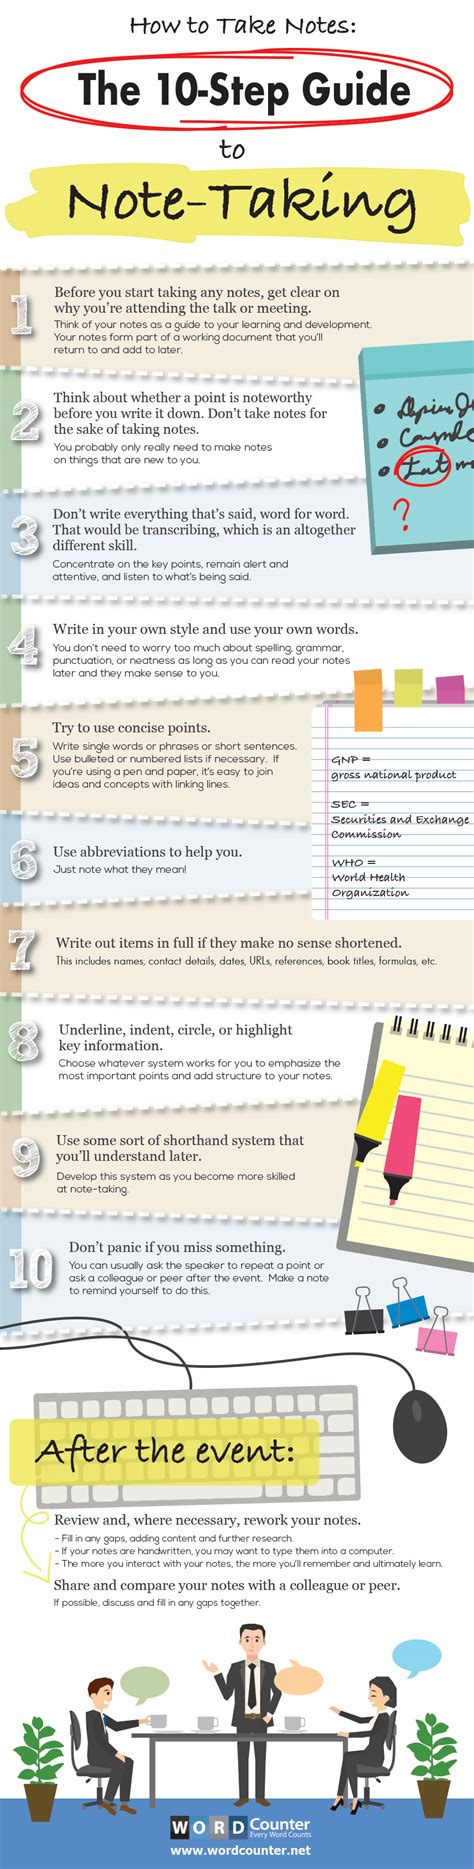 How To Take Notes The Step Guide To Note Taking Infographic Word Counter Blog